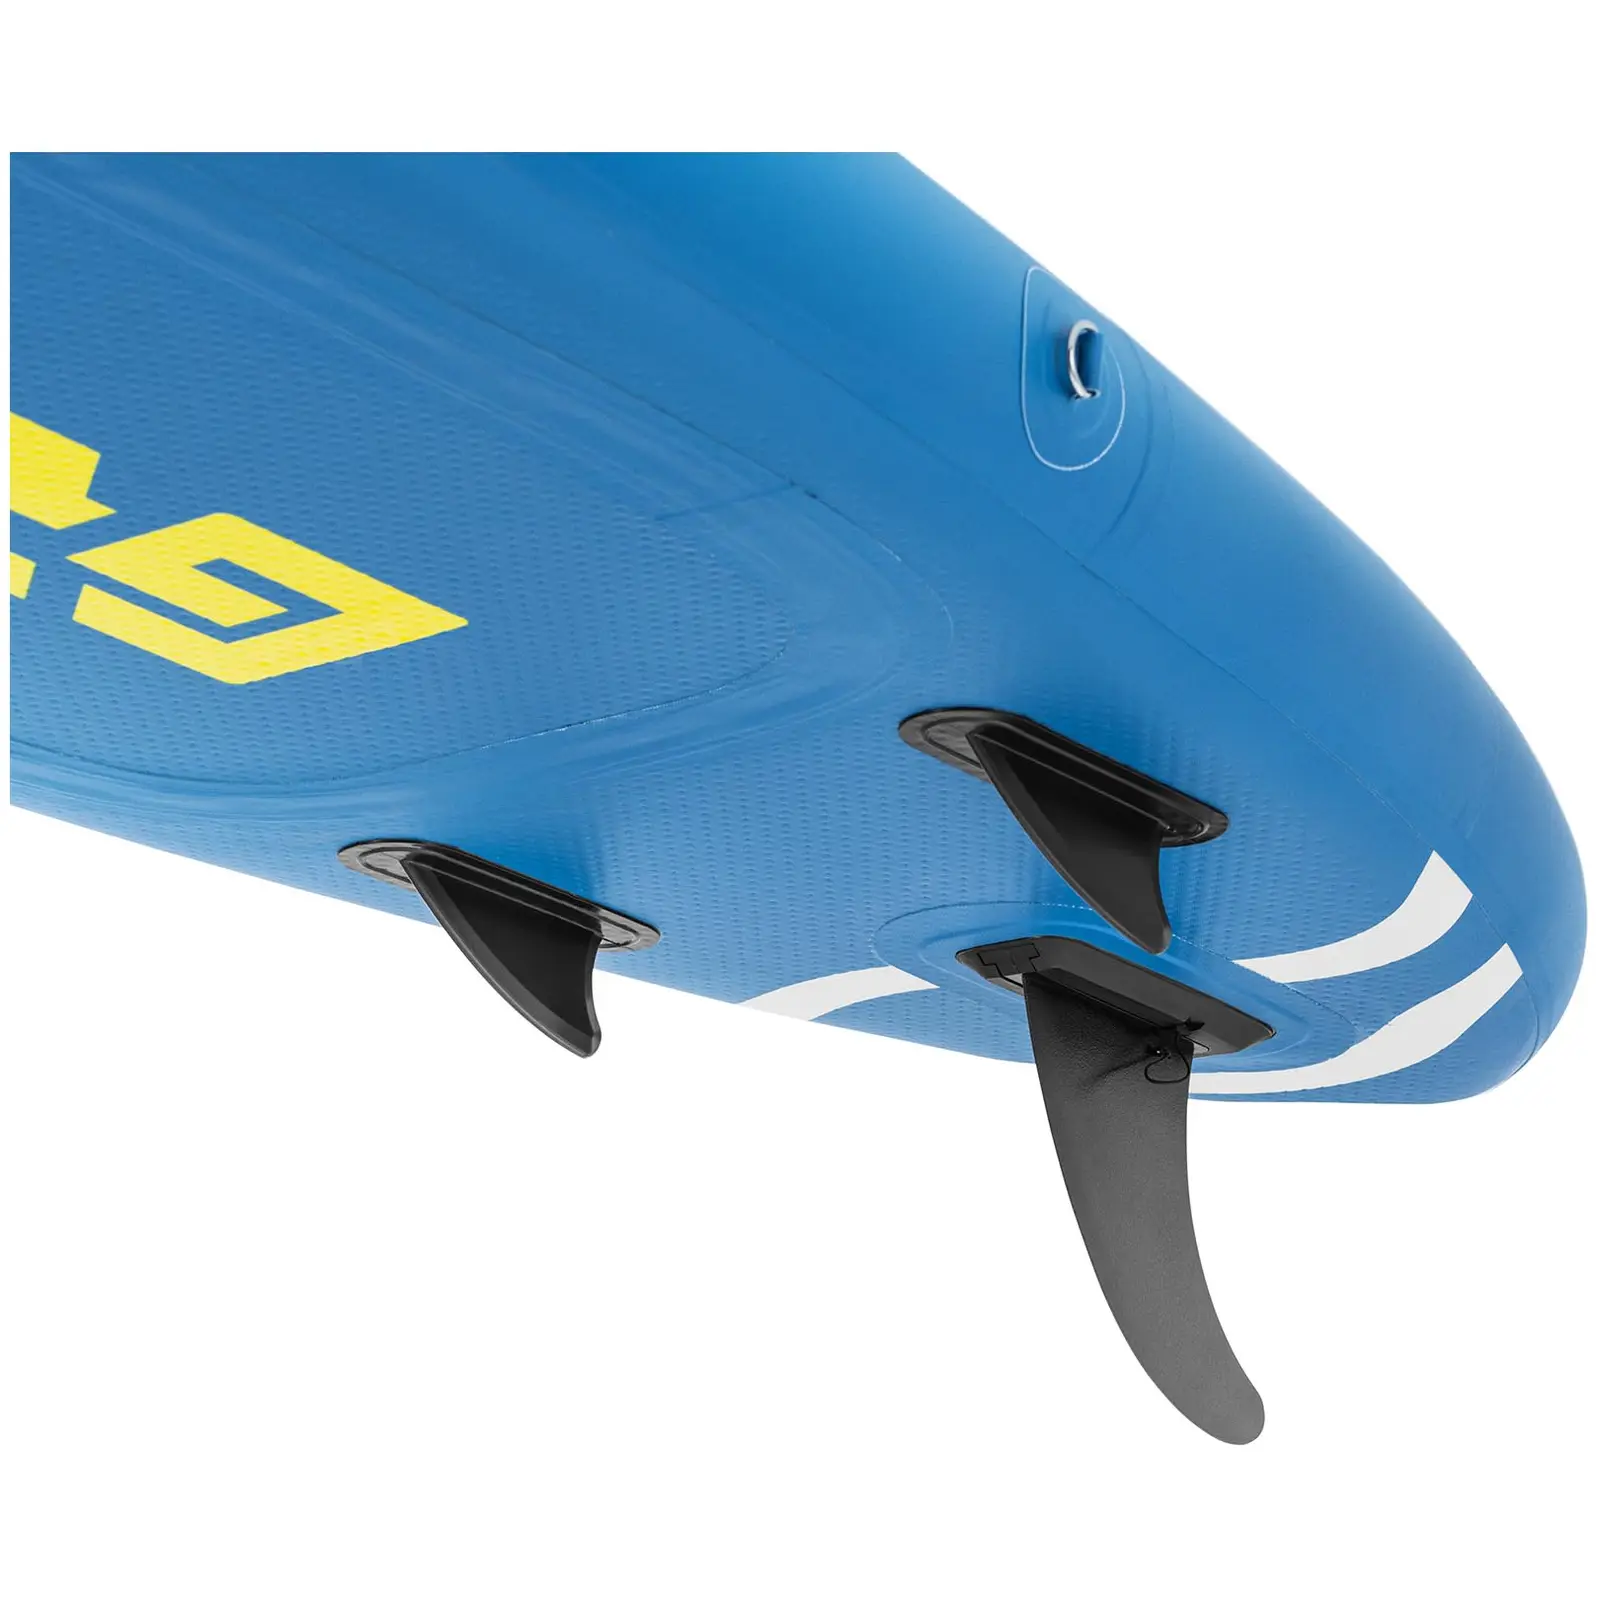 Stand up paddle gonflable - 125 kg - bleu - double chambre - 333 x 82 x 12 cm